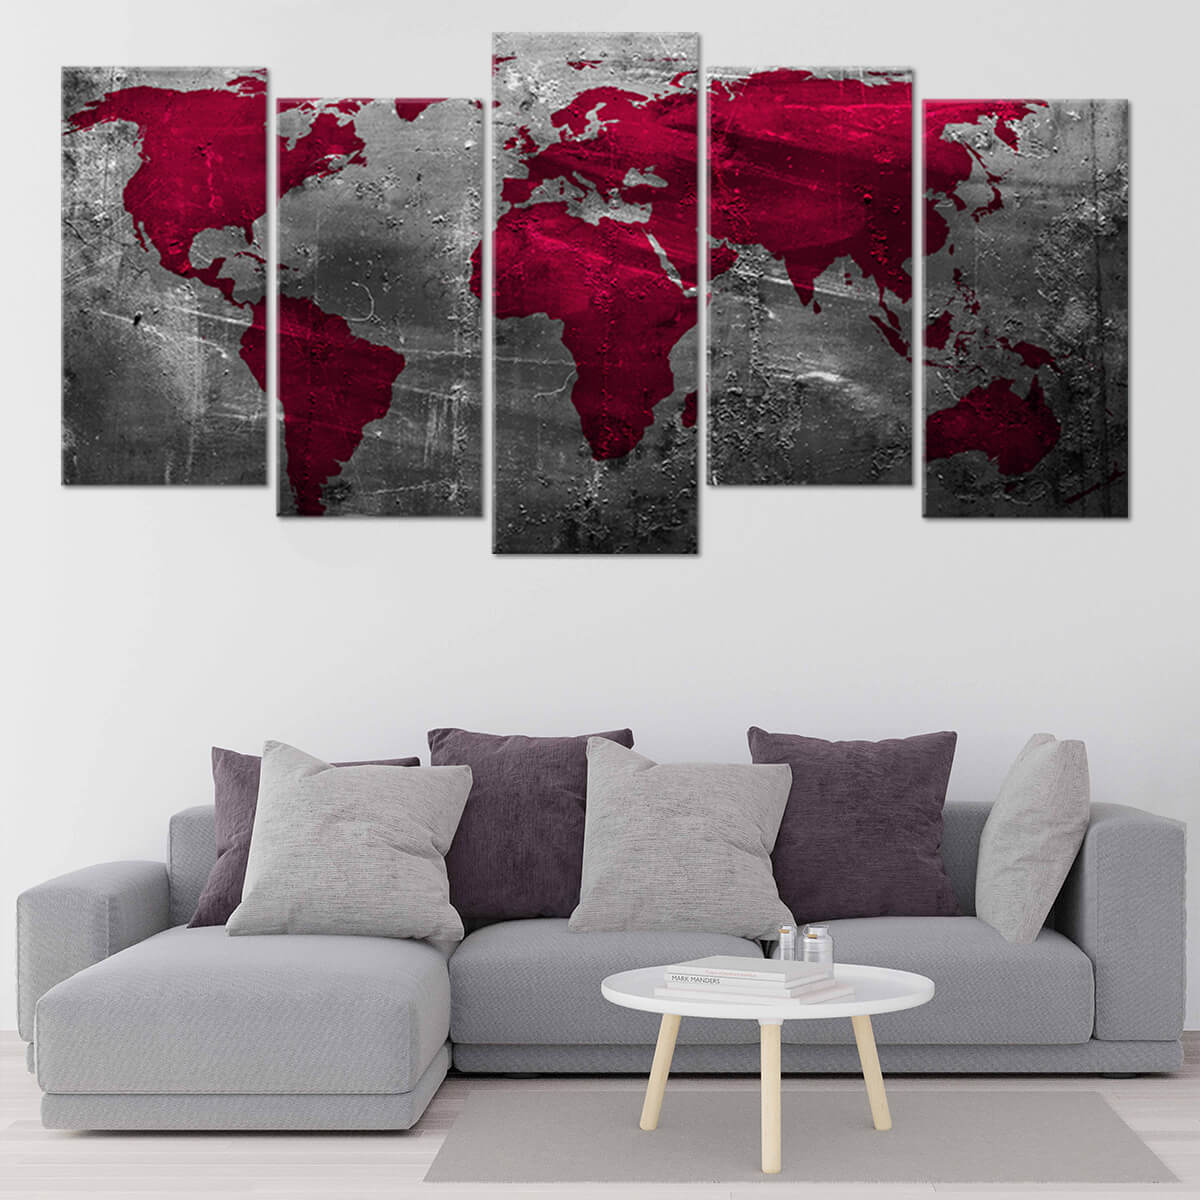 Red Aged World Map Canvas Wall Art Set